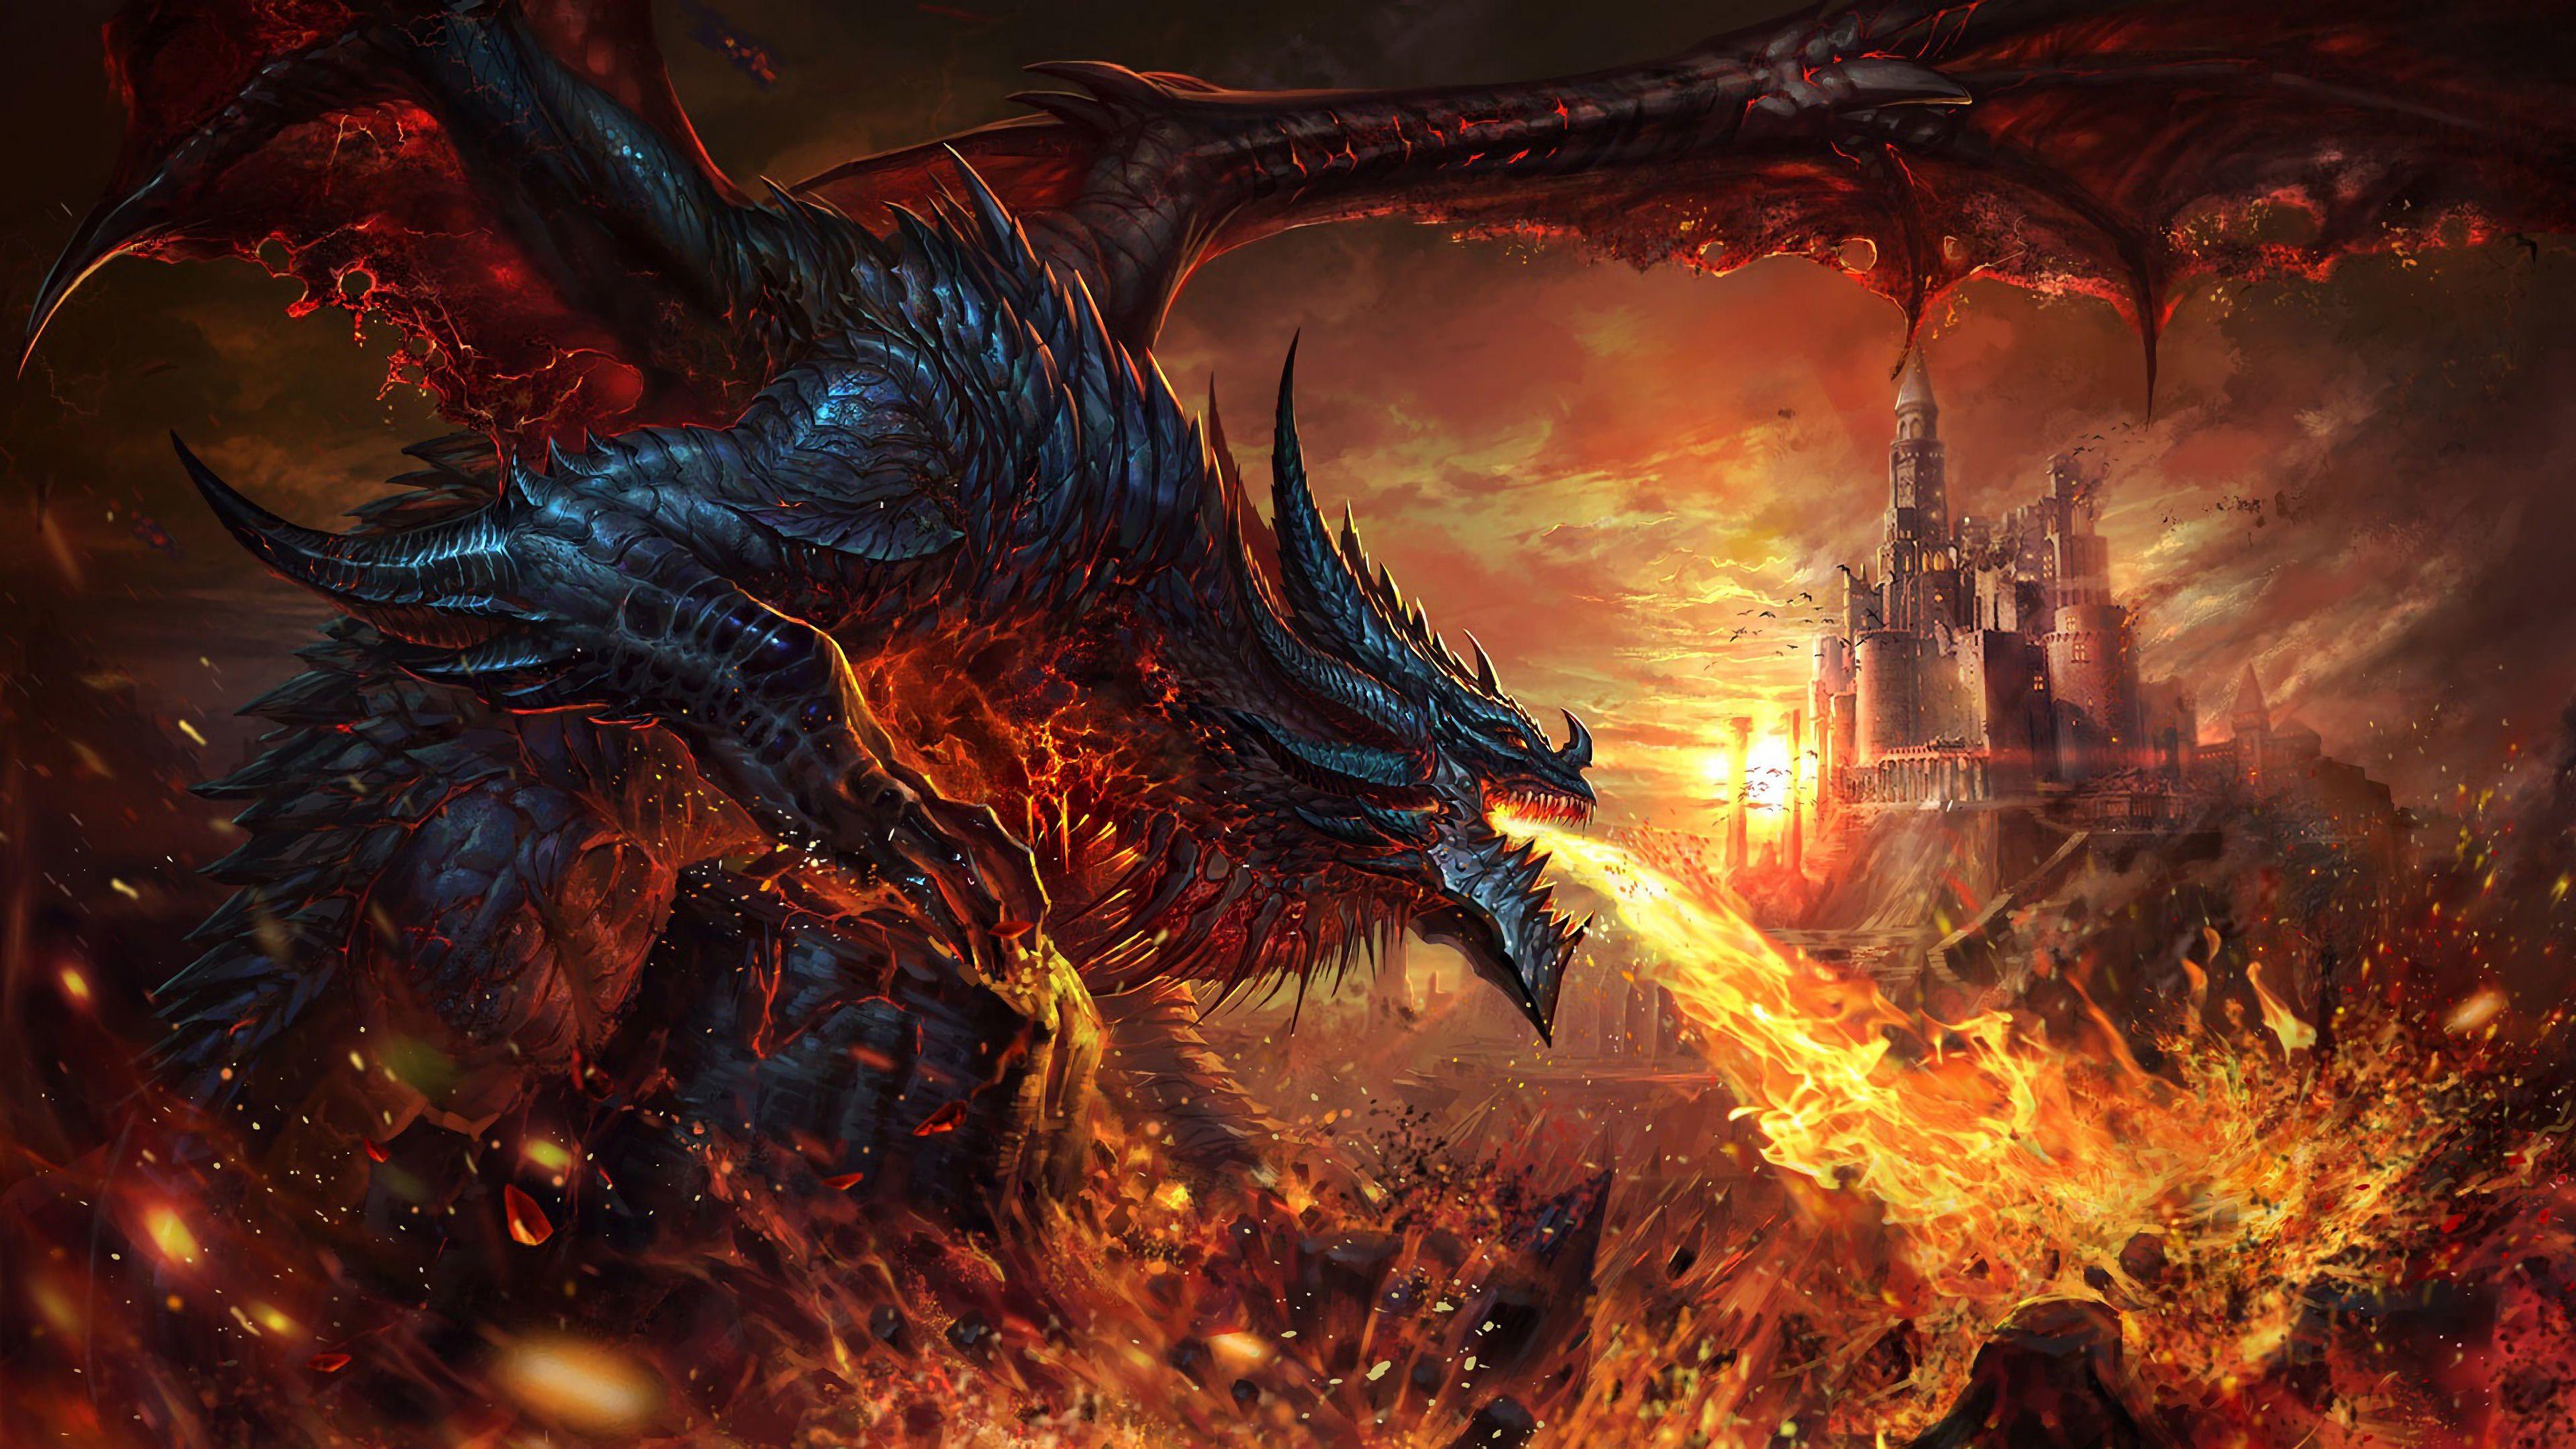 3840 x 2160 · jpeg - Fire Breathing Dragon Wallpapers - Wallpaper Cave